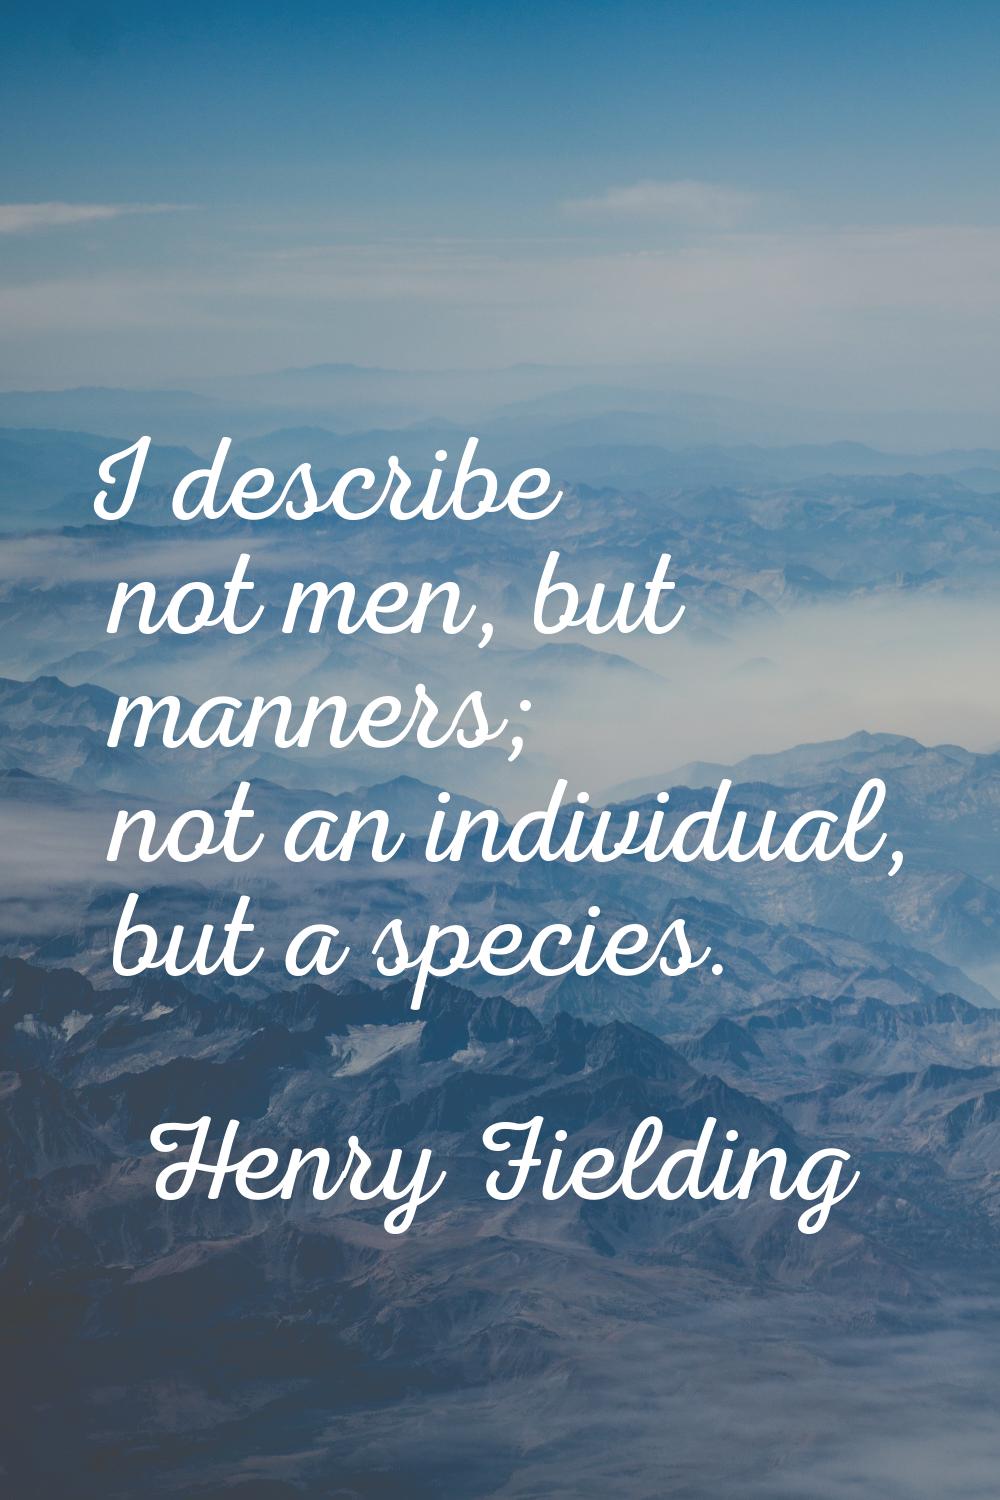 I describe not men, but manners; not an individual, but a species.